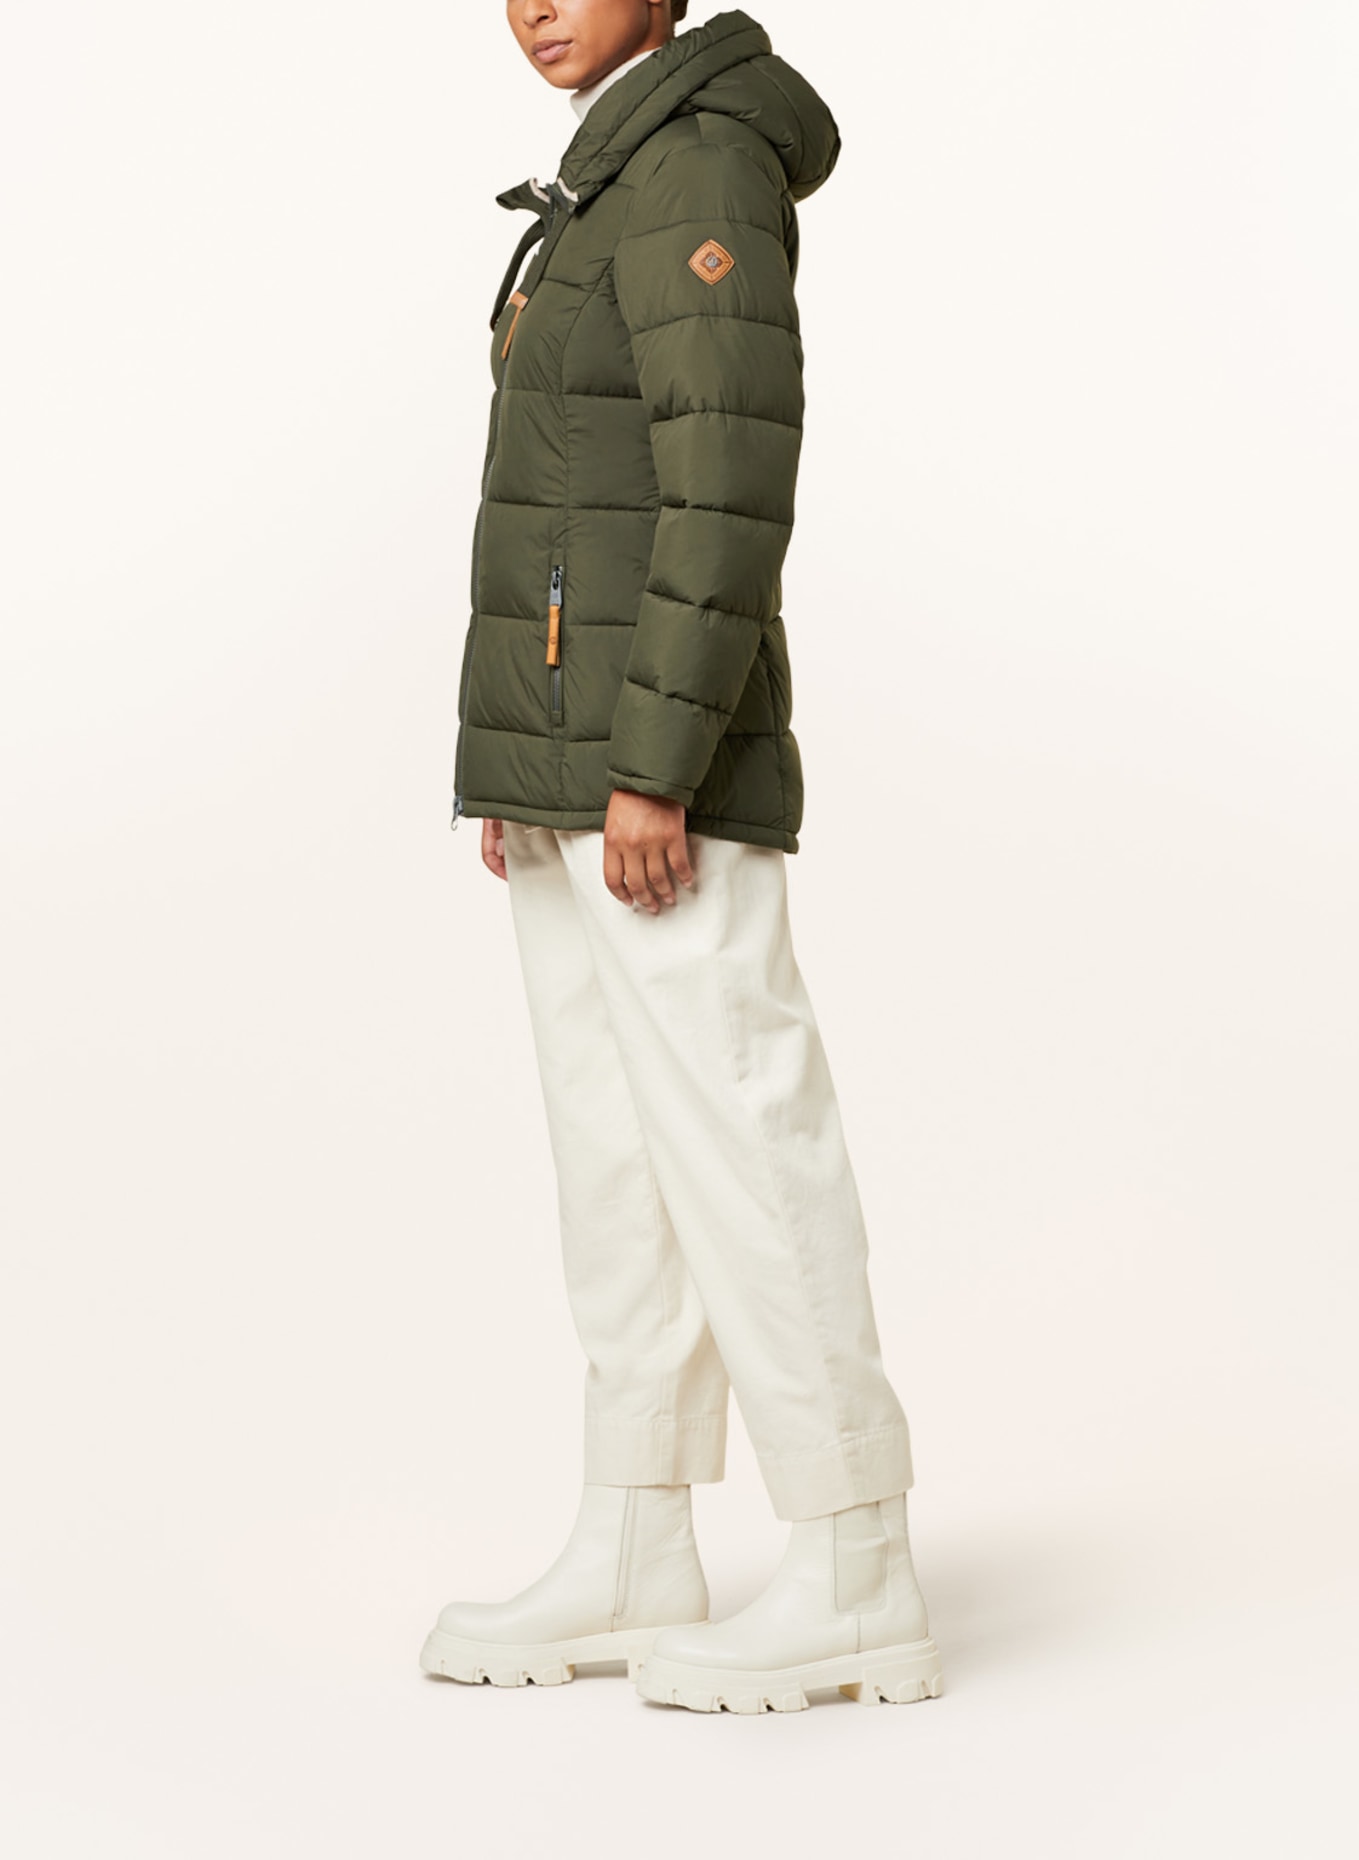 G.I.G.A. DX by killtec jacket Quilted in olive